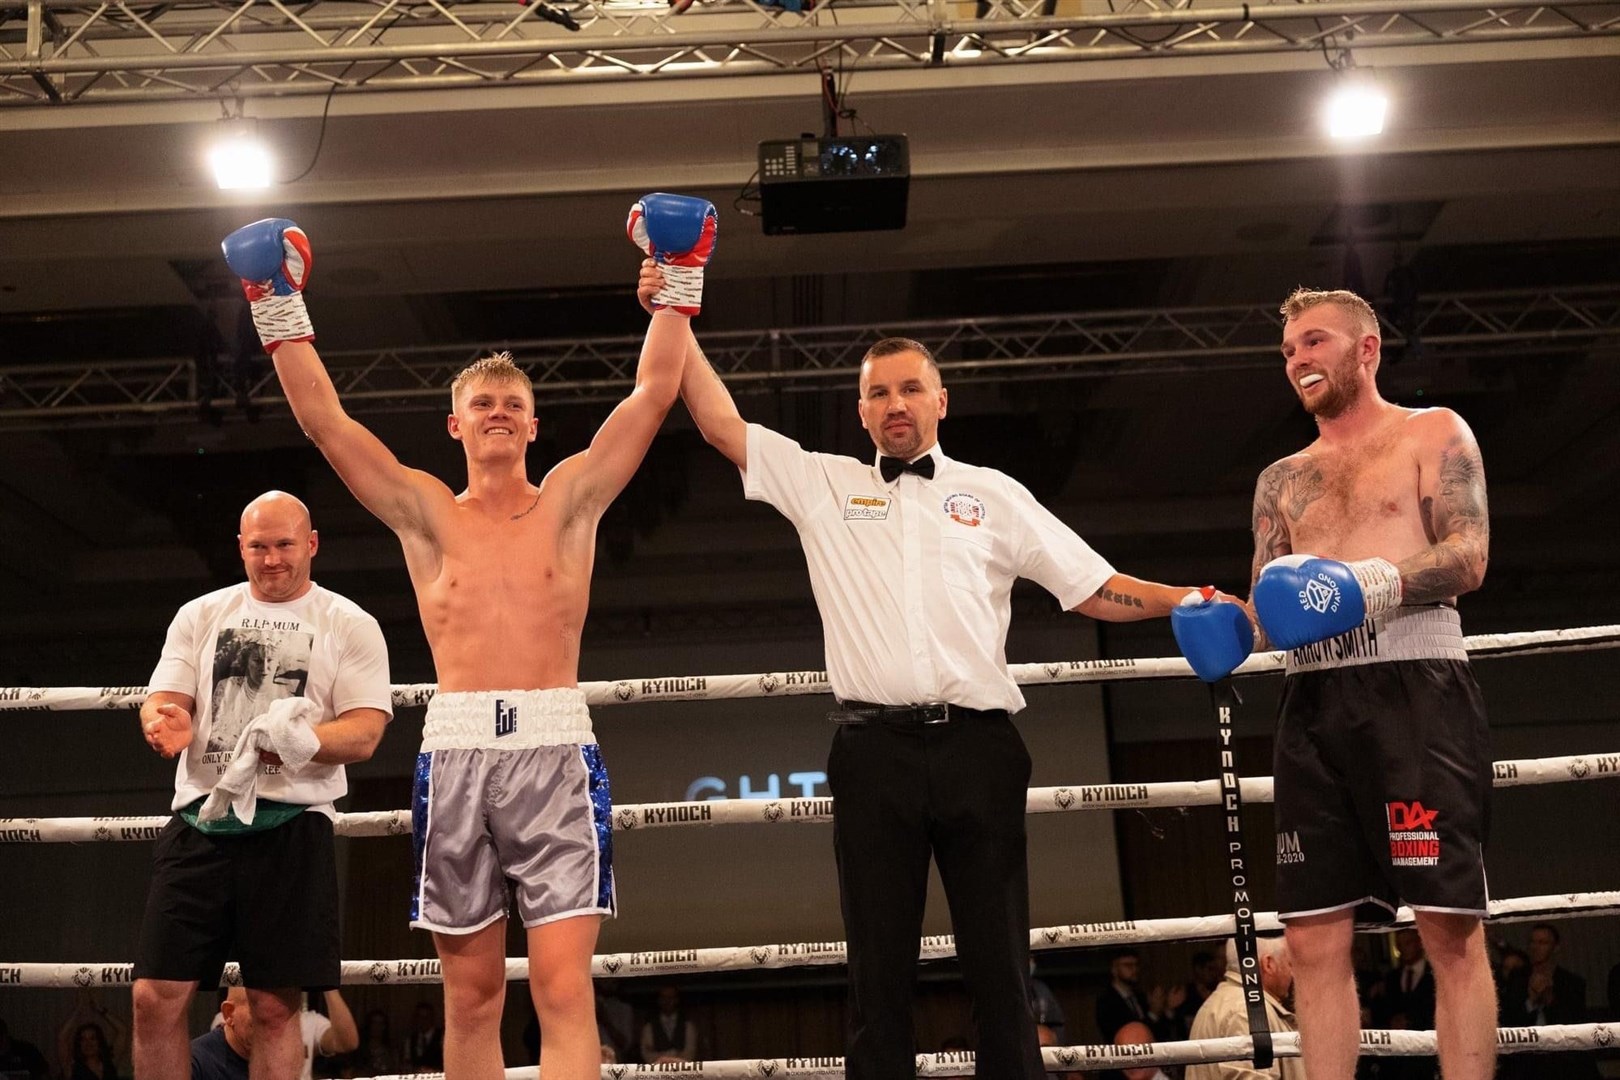 Wilkinson gets his arm raised after a unanimous points verdict in his favour.